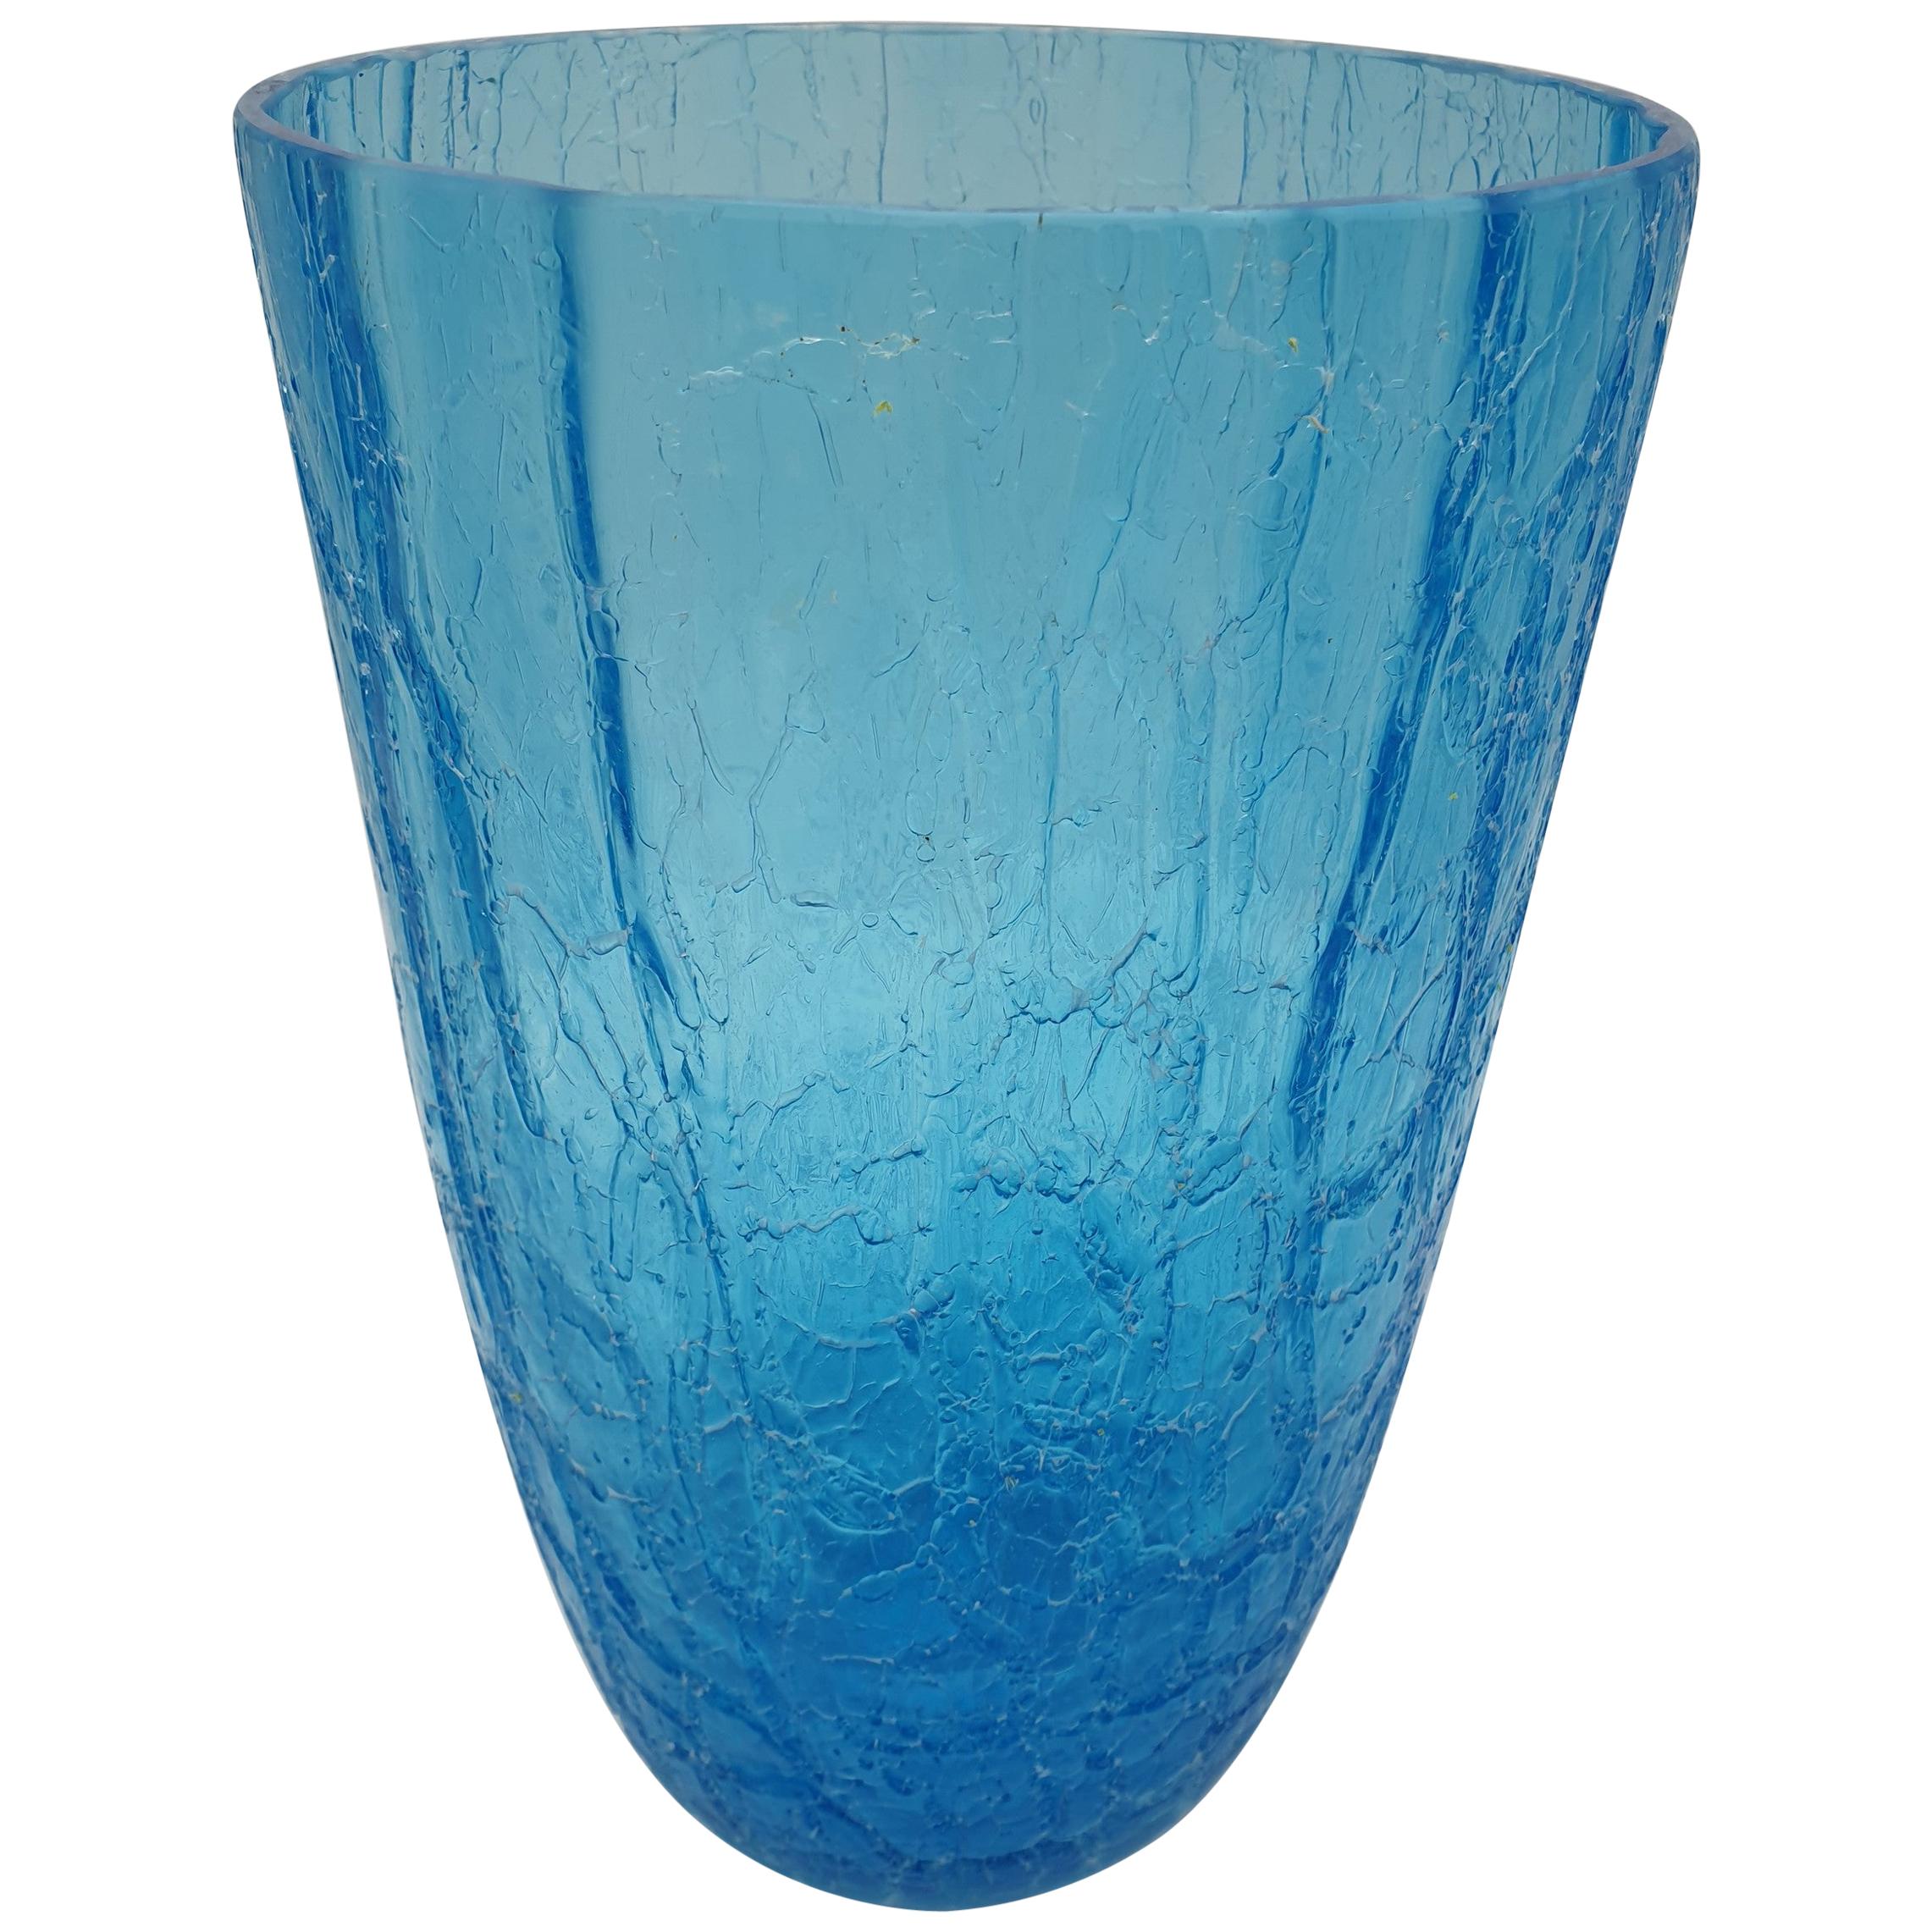 Modern Turquoise Blue Murano "Corroso" Crakle Glass Vase by Gino Cenedese, 1990s For Sale